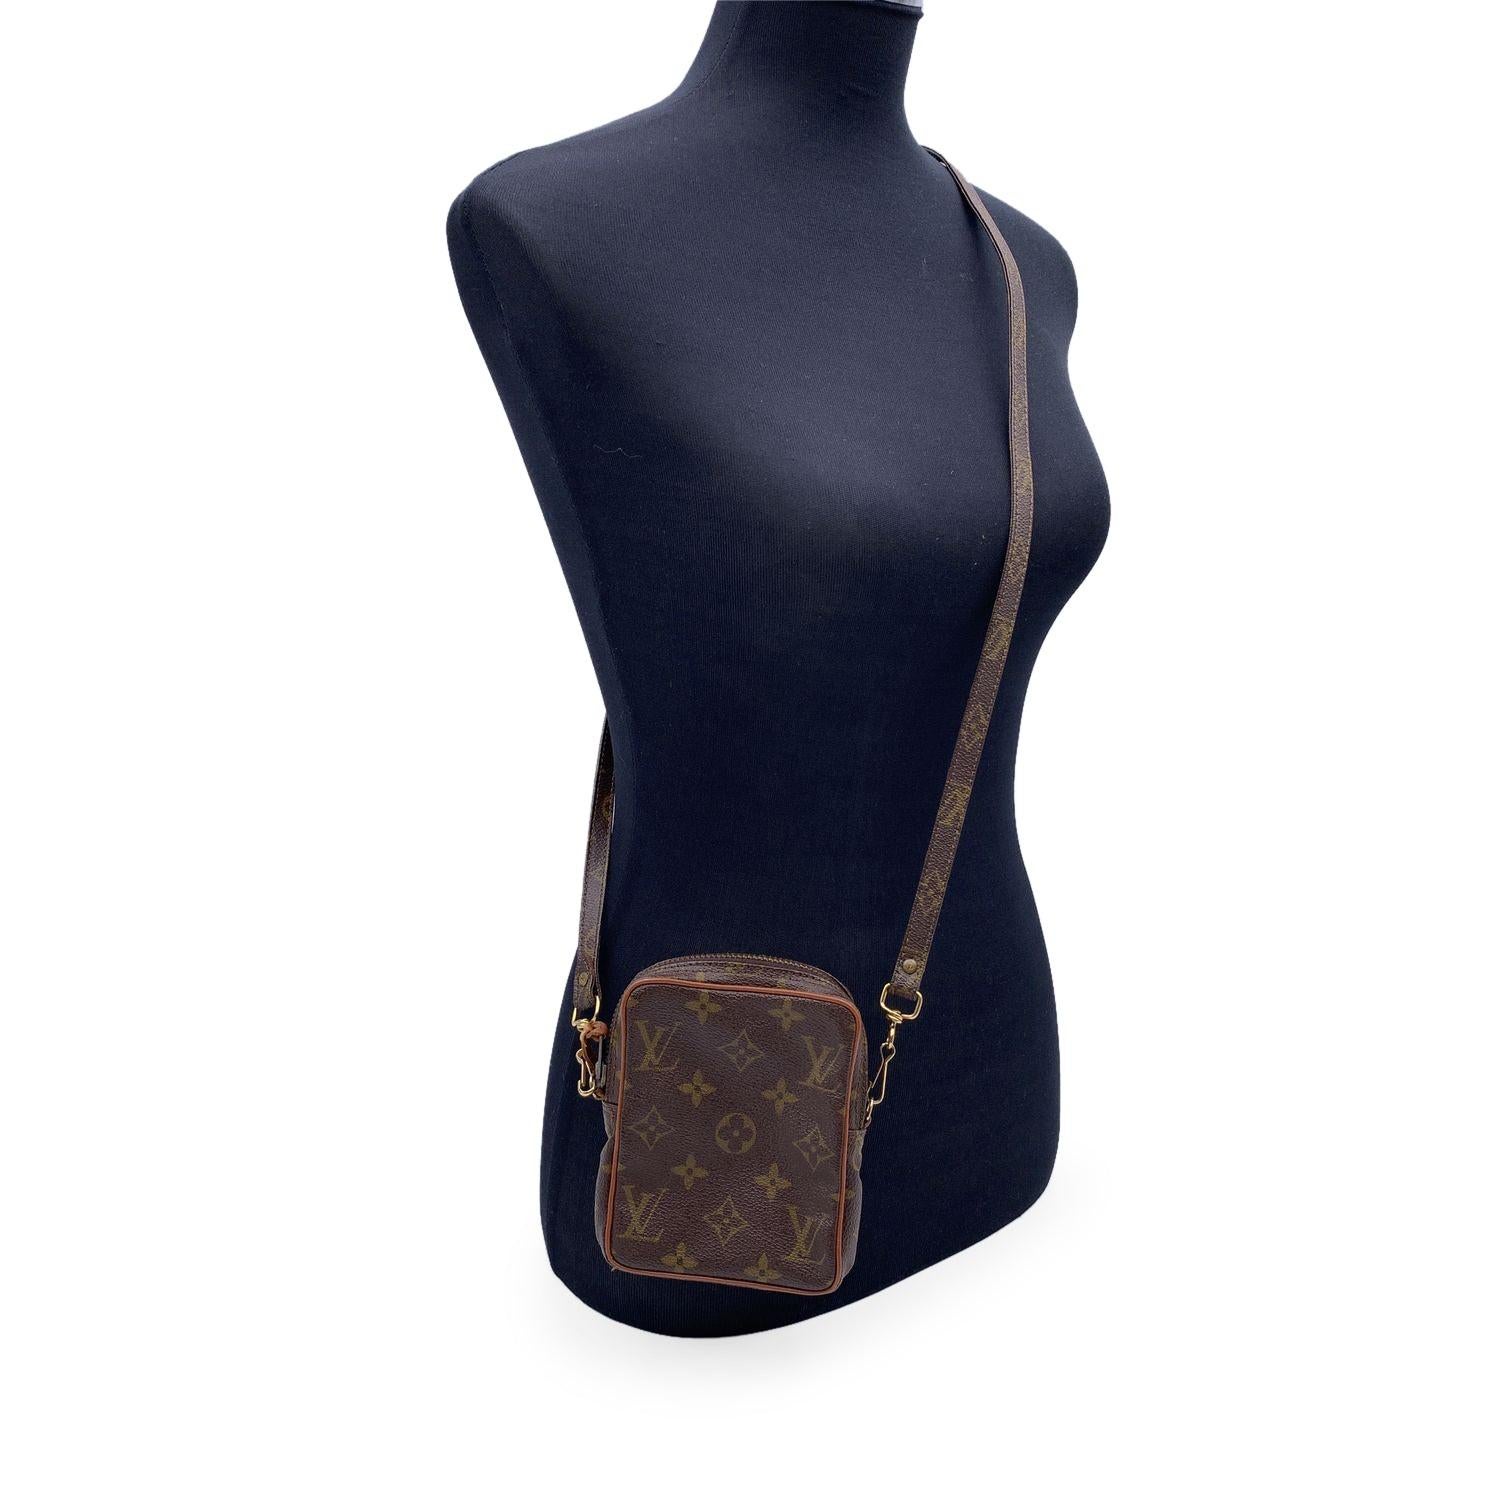 Stylish 'Mini Danube' Crossbody camera bag beautifully crafted in timeless monogram canvas. The bag features tan leather trim, a cross body strap with gold metal hardware. The top zipper opens to a leather interior. Monogram shoulder strap. 'LOUIS